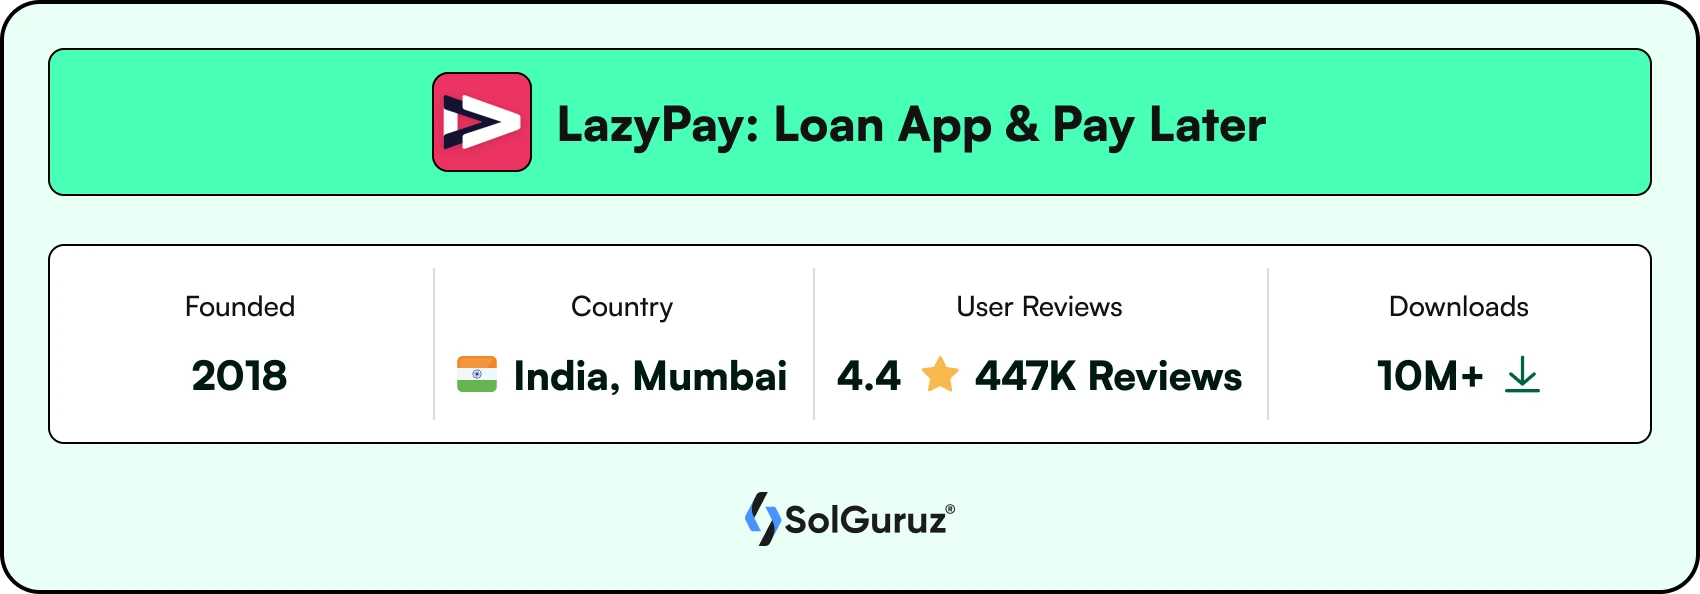 LazyPay - Loan App and Pay Later in India